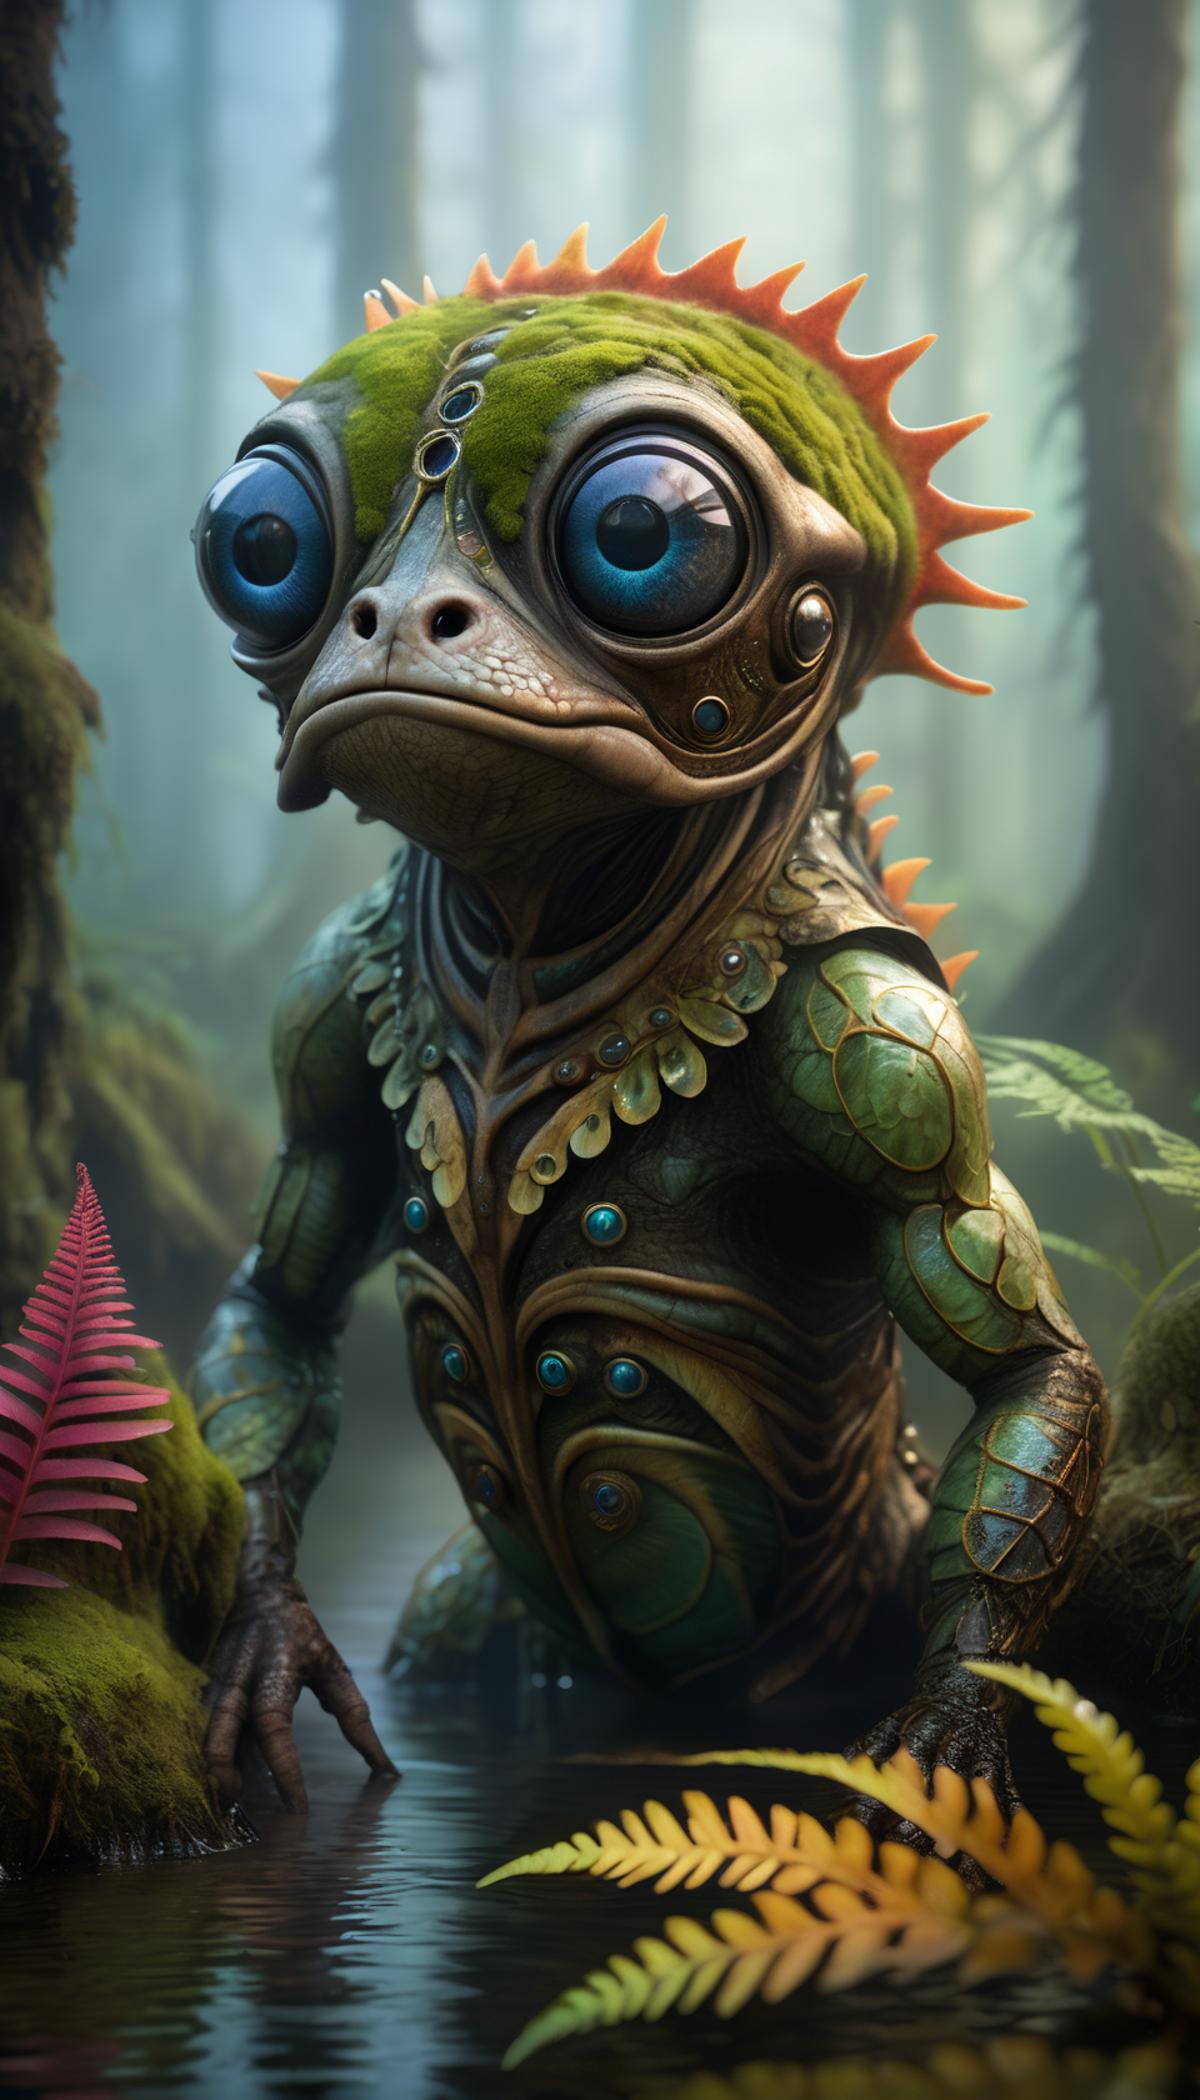 A green creature with blue eyes and a large fin on its head, standing in a jungle environment.